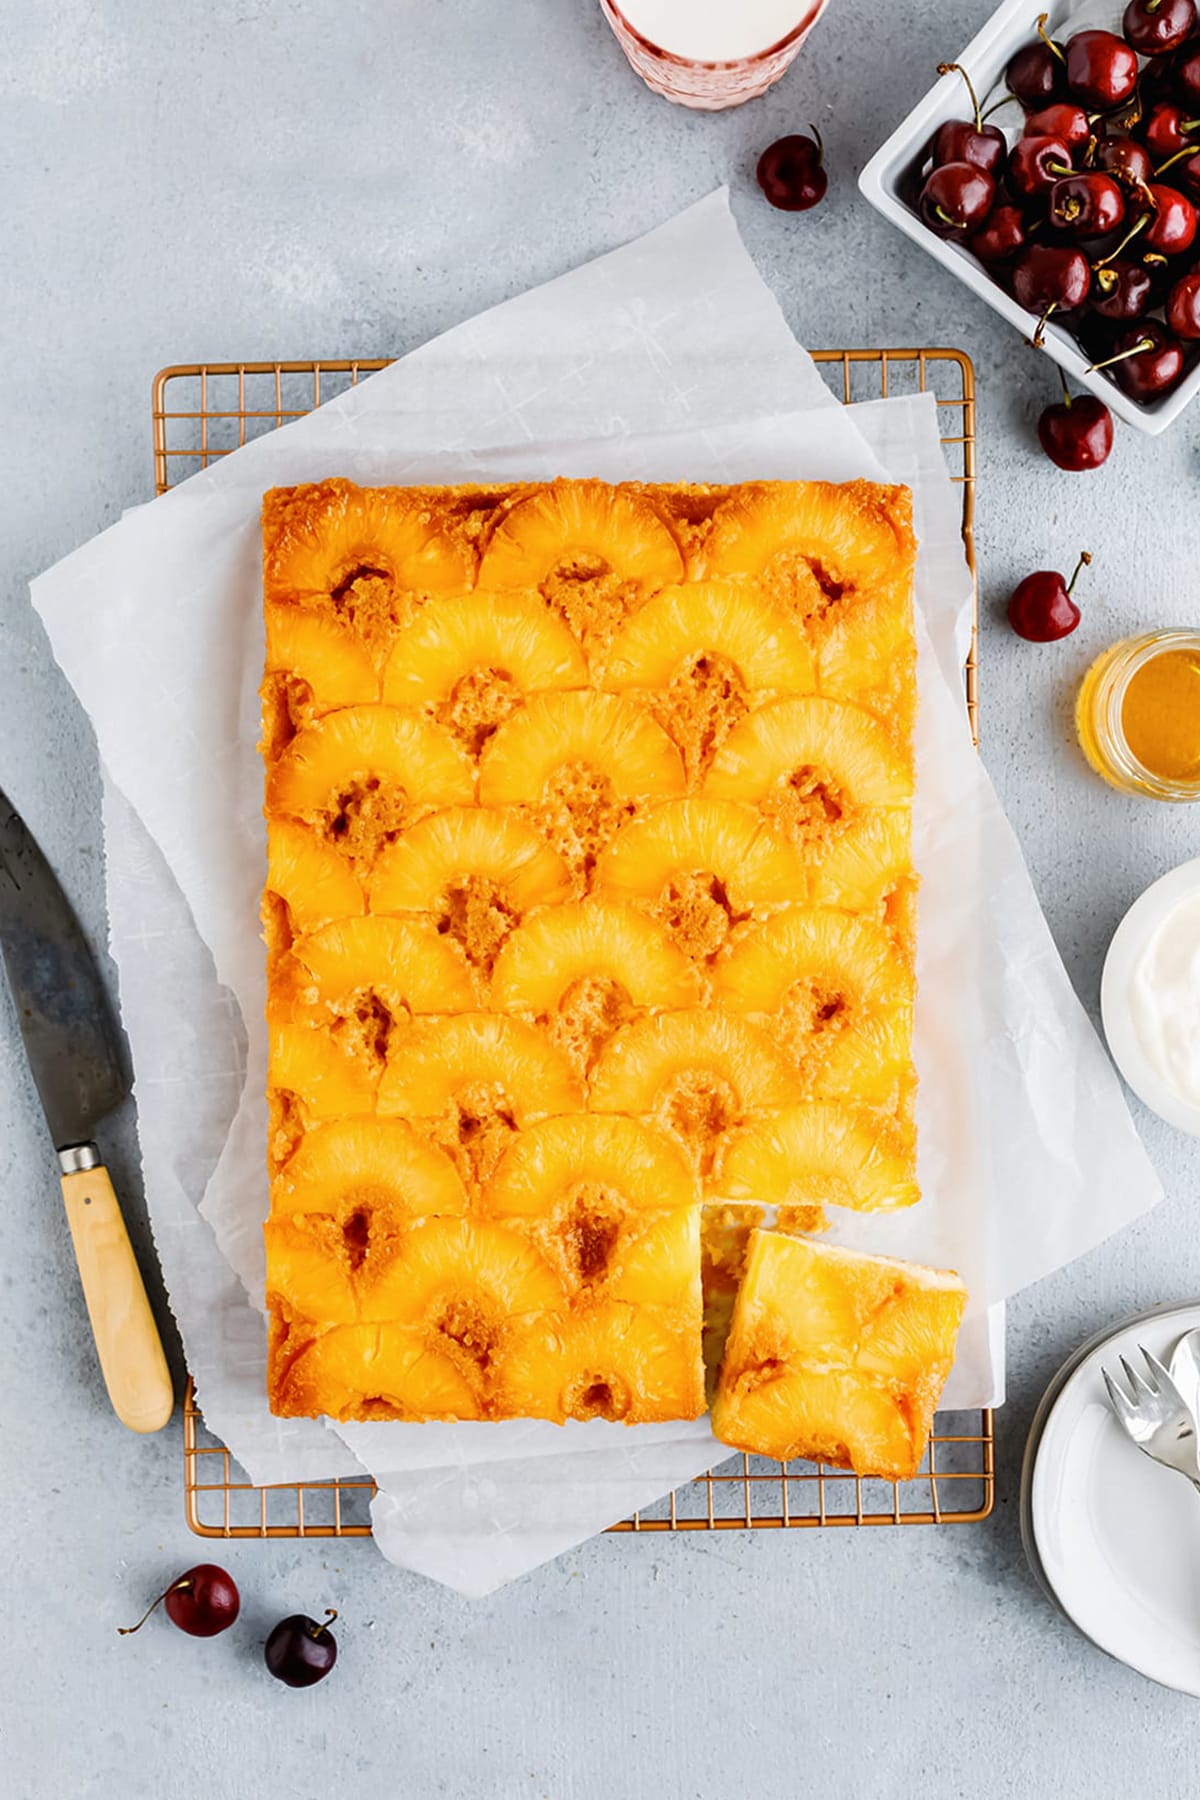 This Easy Pineapple Upside-down recipe uses boxed cake mix and is the perfect summer snack to enjoy with friends and family.